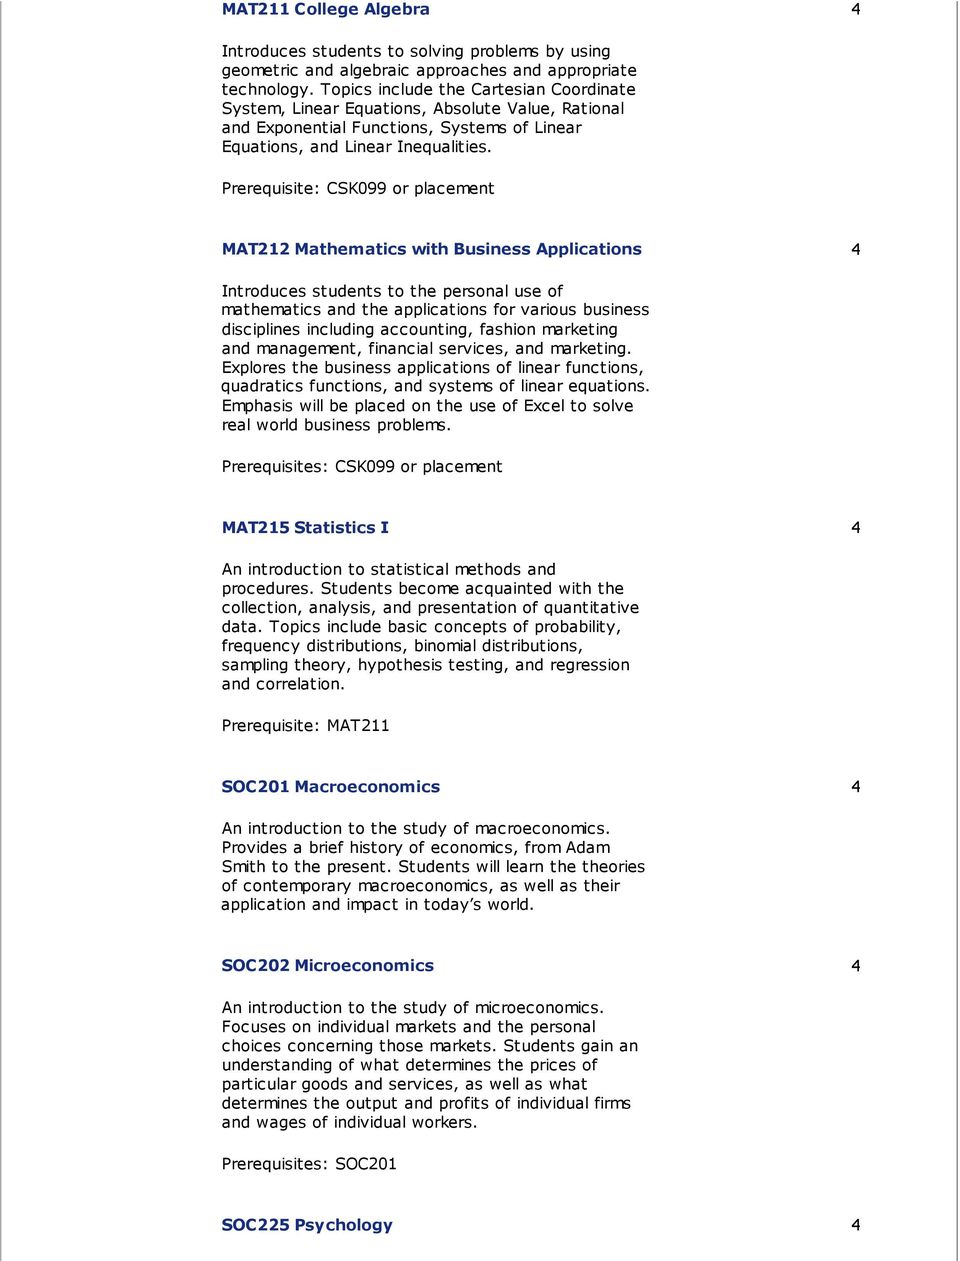 Prerequisite: CSK099 or placement MAT212 Mathematics with Business Applications 4 Introduces students to the personal use of mathematics and the applications for various business disciplines